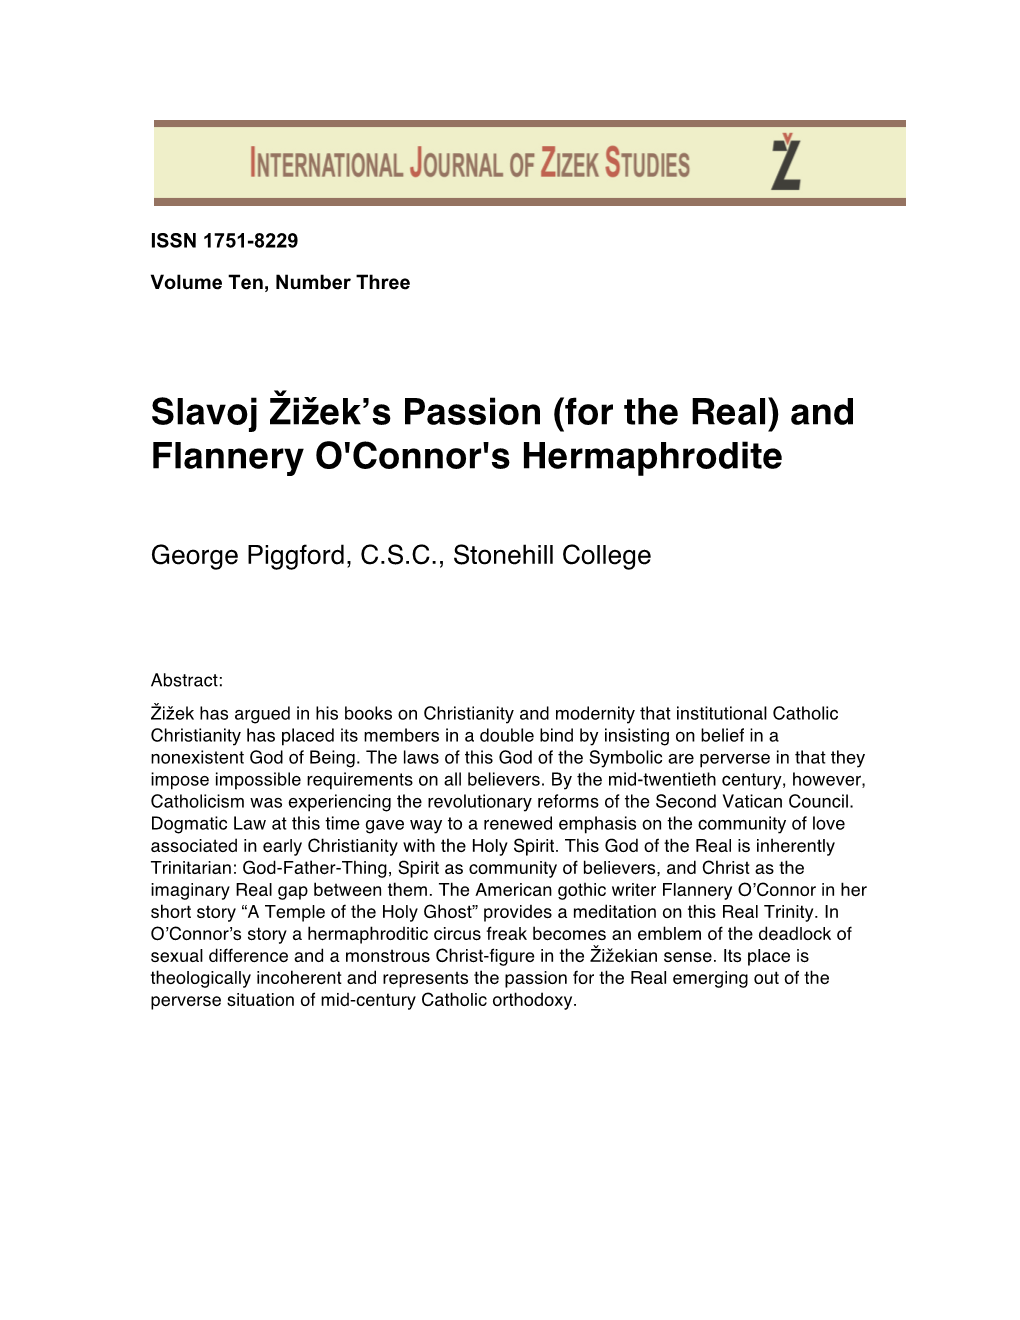 Slavoj Žižek's Passion (For the Real) and Flannery O'connor's